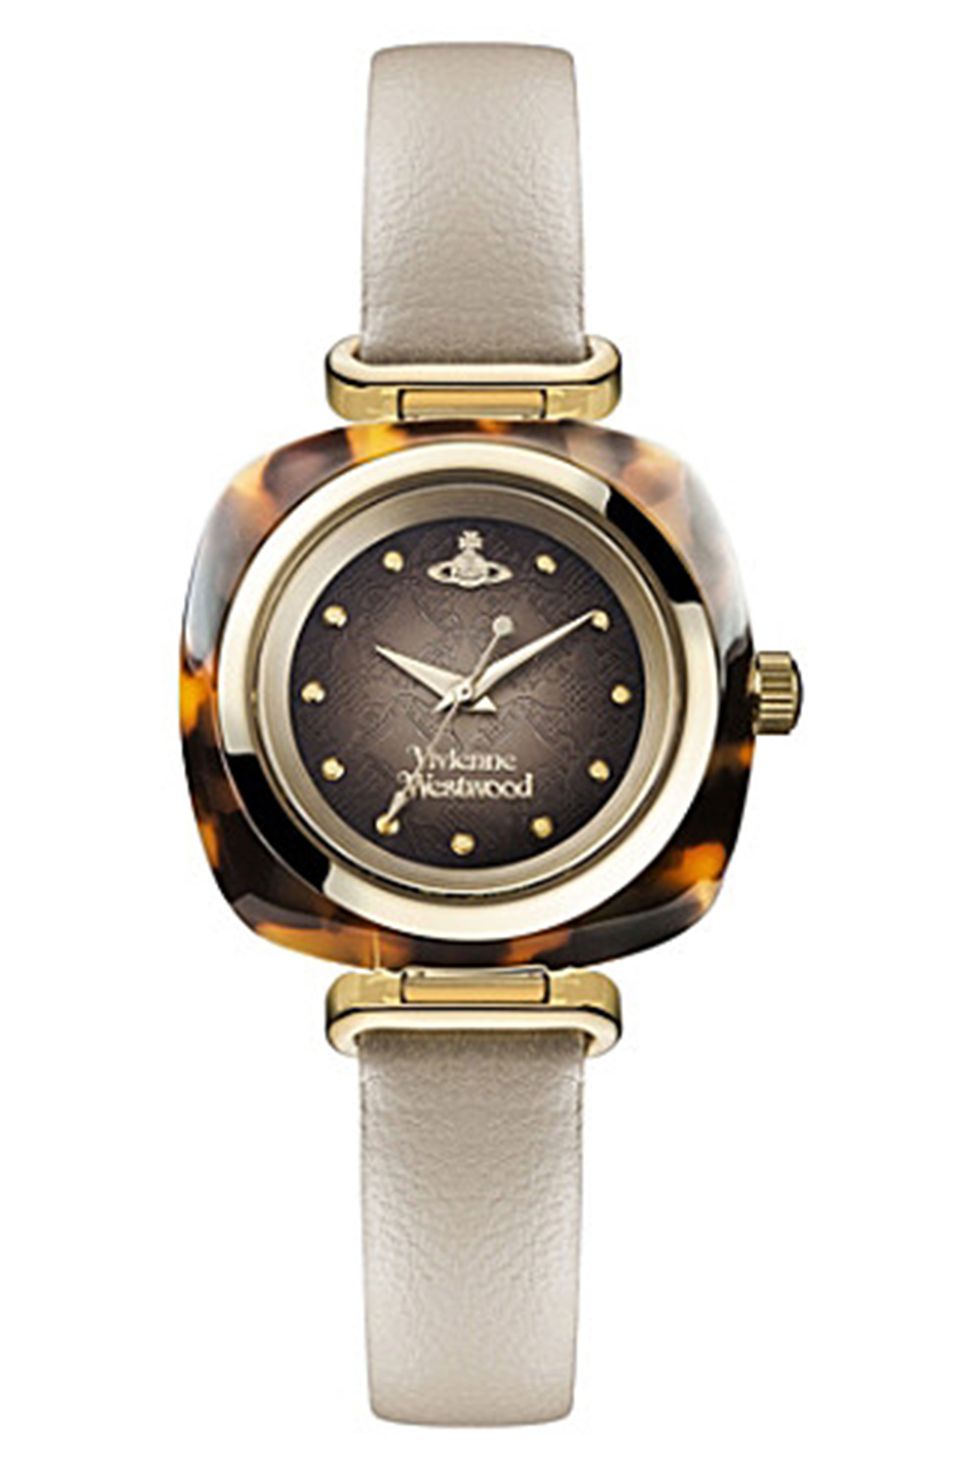 <p>Elegante cinturino sottile per questo orologio donna con<strong data-redactor-tag="strong" data-verified="redactor"> quadrante tartarugato</strong> e dettagli oro, <strong data-redactor-tag="strong" data-verified="redactor">Vivienne Westwood</strong>,&nbsp;<em data-redactor-tag="em">Selfridges.com.</em><span class="redactor-invisible-space" data-verified="redactor" data-redactor-tag="span" data-redactor-class="redactor-invisible-space"></span><span class="redactor-invisible-space" data-verified="redactor" data-redactor-tag="span" data-redactor-class="redactor-invisible-space"></span></p><p><a href="http://www.selfridges.com/GB/en/cat/vivienne-westwood-vv141bg-time-machine-stainless-steel-and-leather-watch_759-10001-VV141BG/?previewAttribute=Multi-coloured" target="_blank" data-tracking-id="recirc-text-link"></a></p>